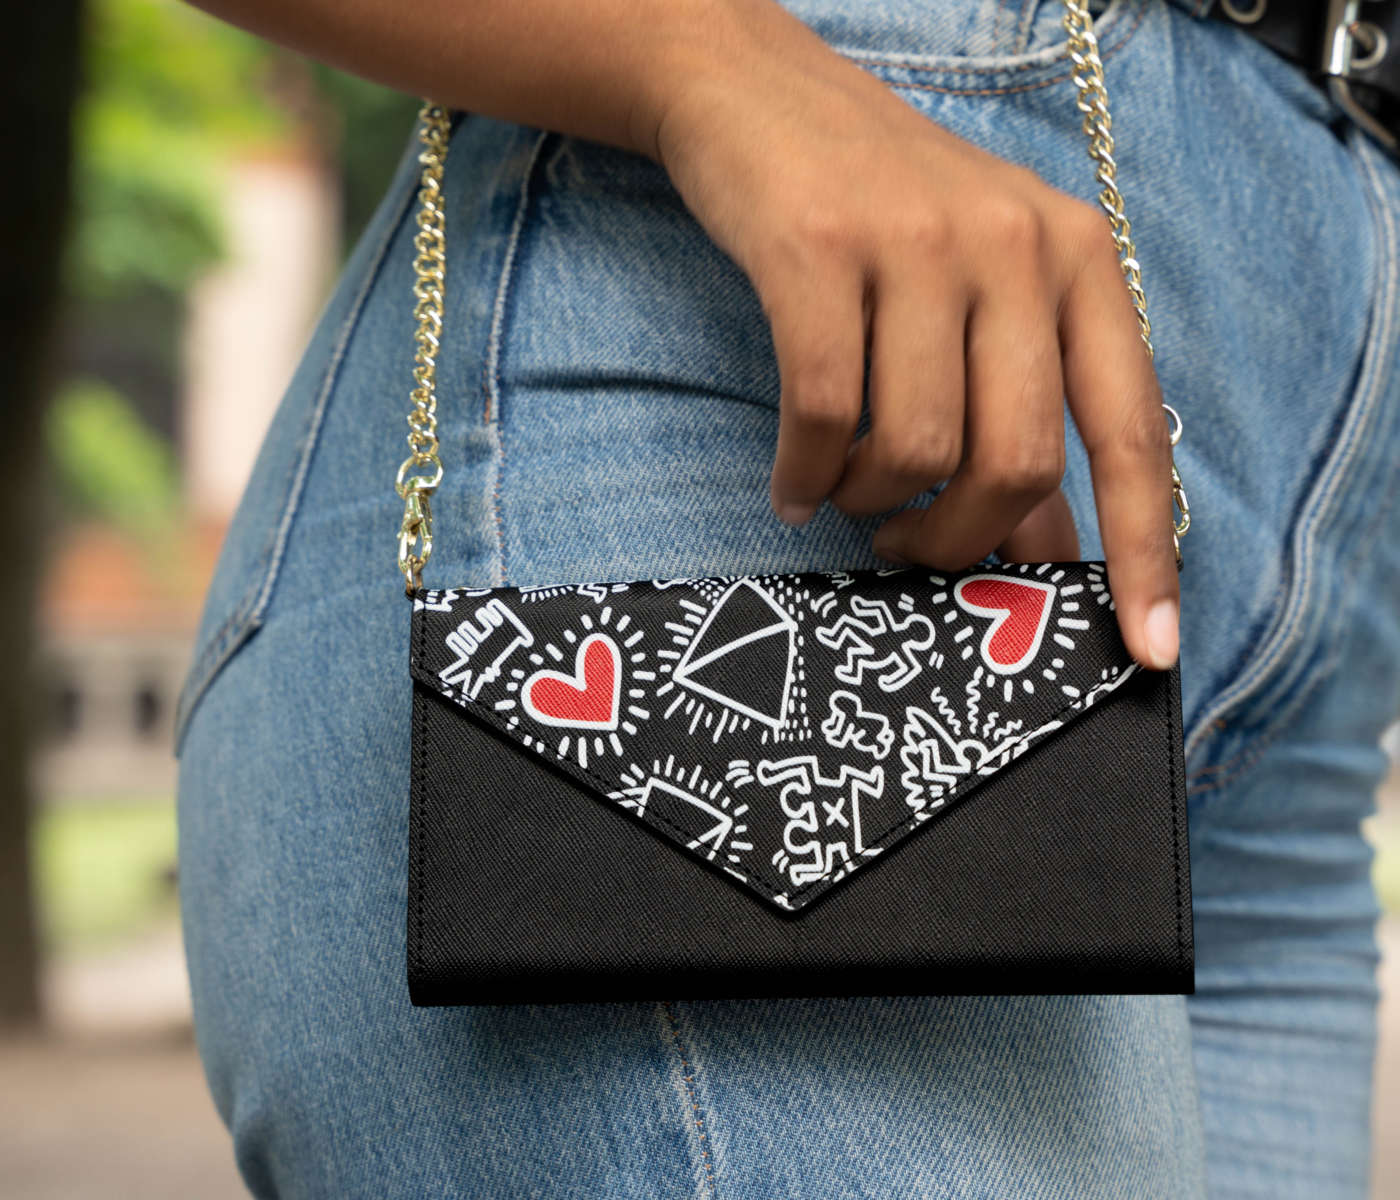 Celly x Keith Haring